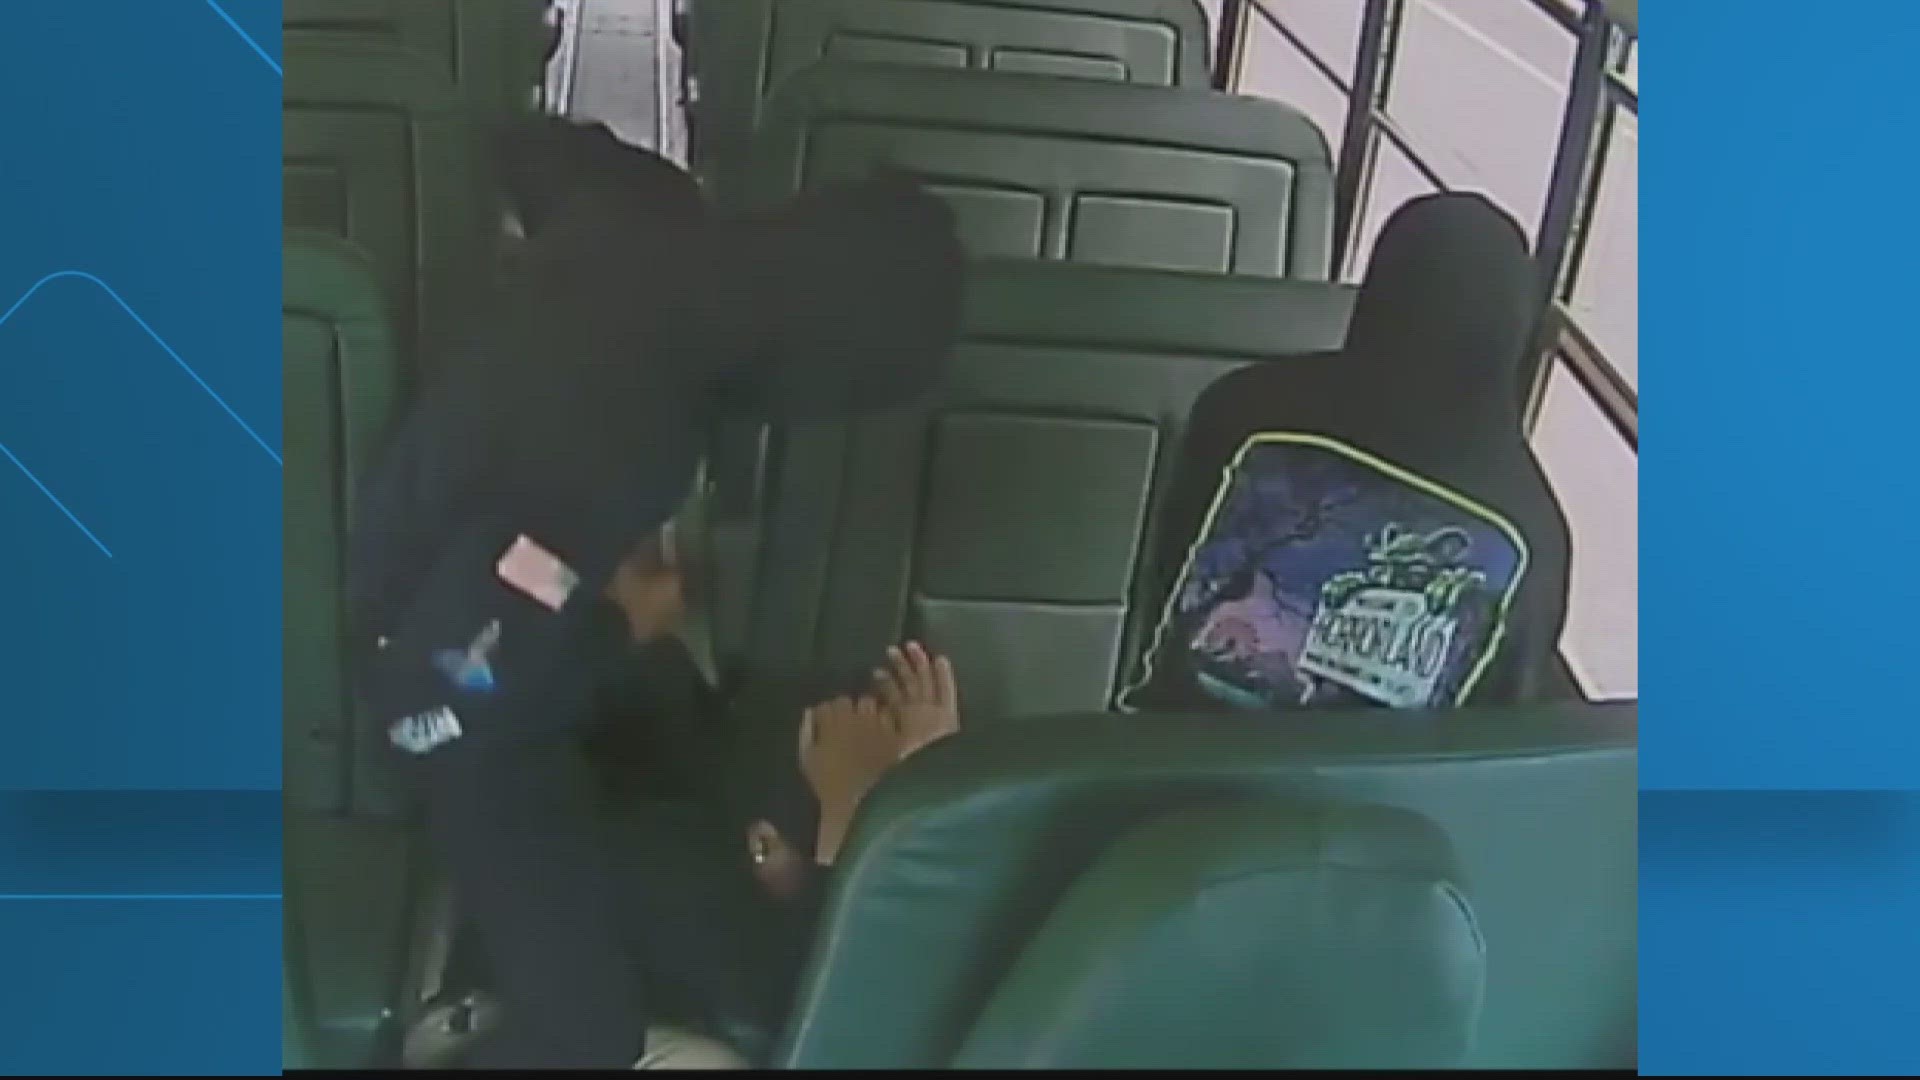 14-year-old girl arrested for orchestrating attempted shooting of student on school bus